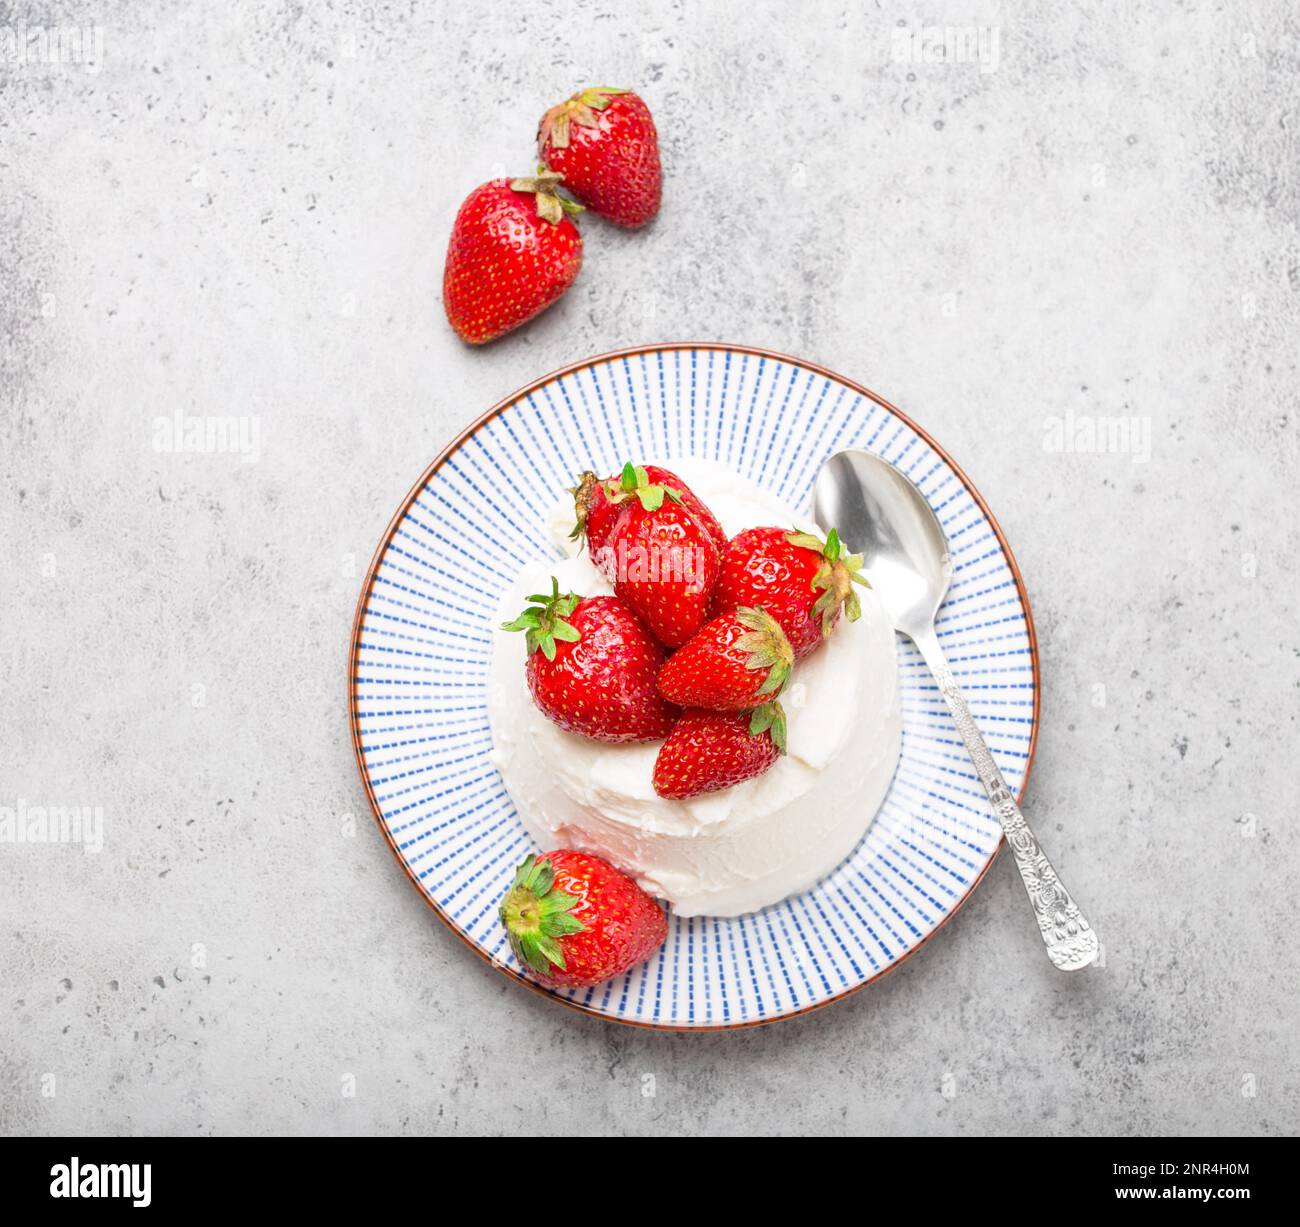 Top-view of fresh Italian cheese ricotta with strawberries on a plate with a spoon, grey rustic stone background, light summer dessert or snack, good Stock Photo